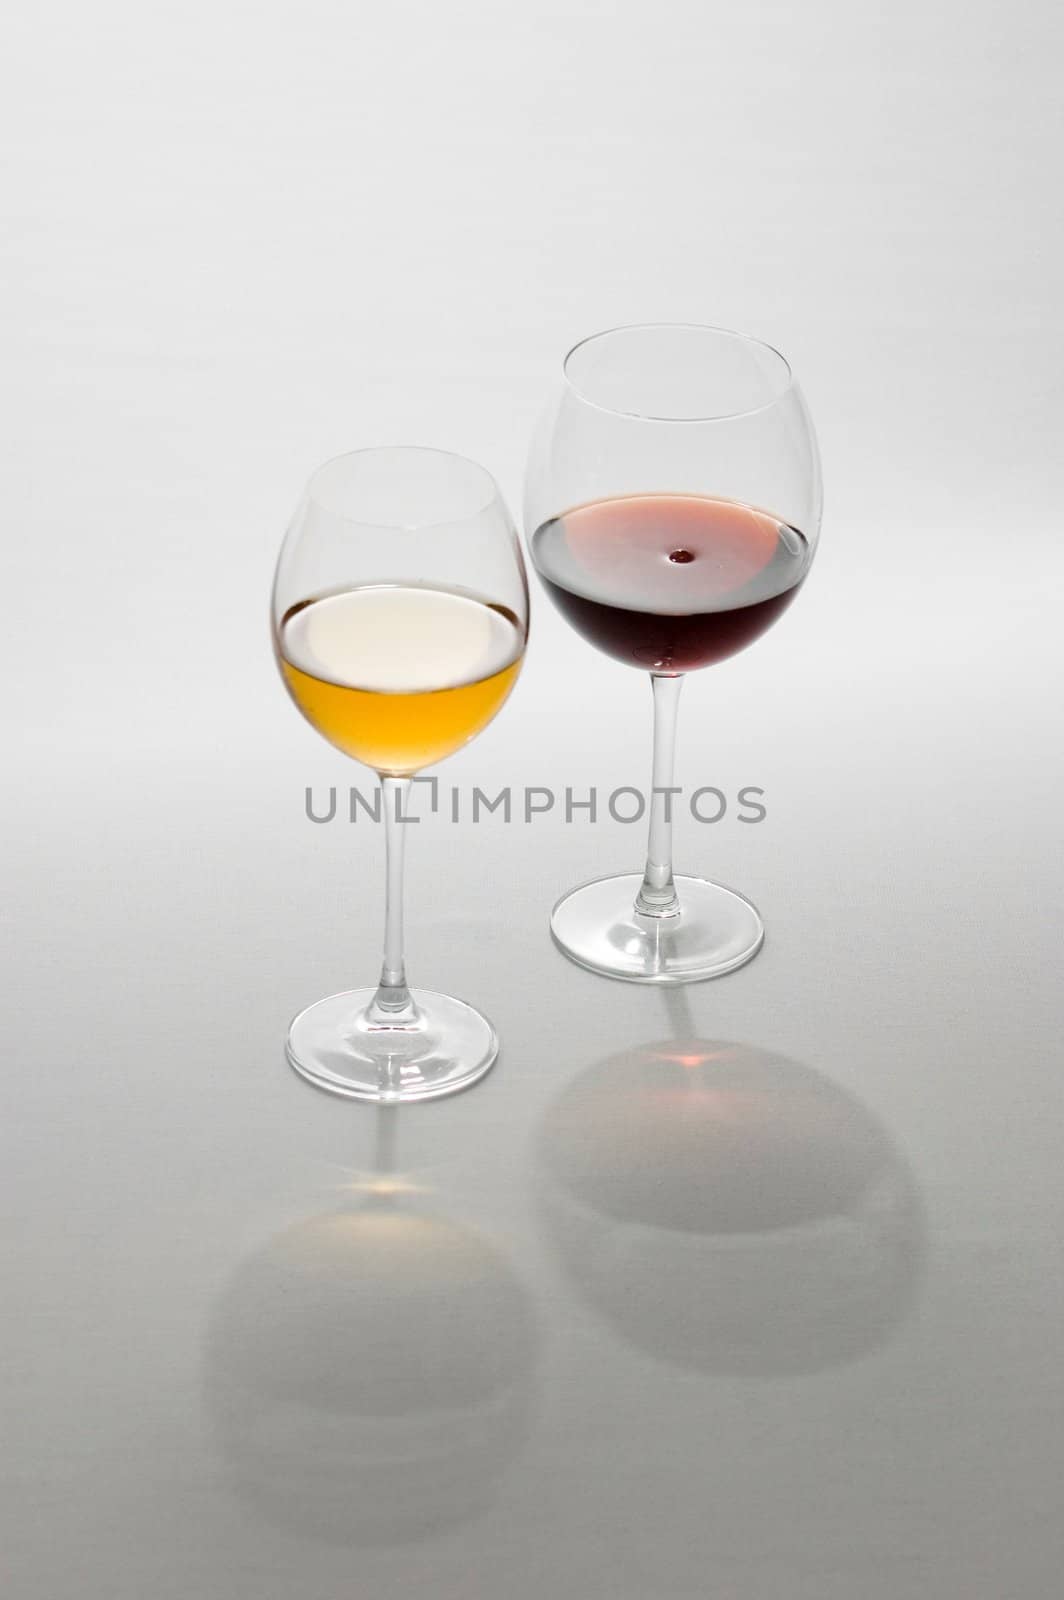 Two tall glasses on light background filled with red and white wine